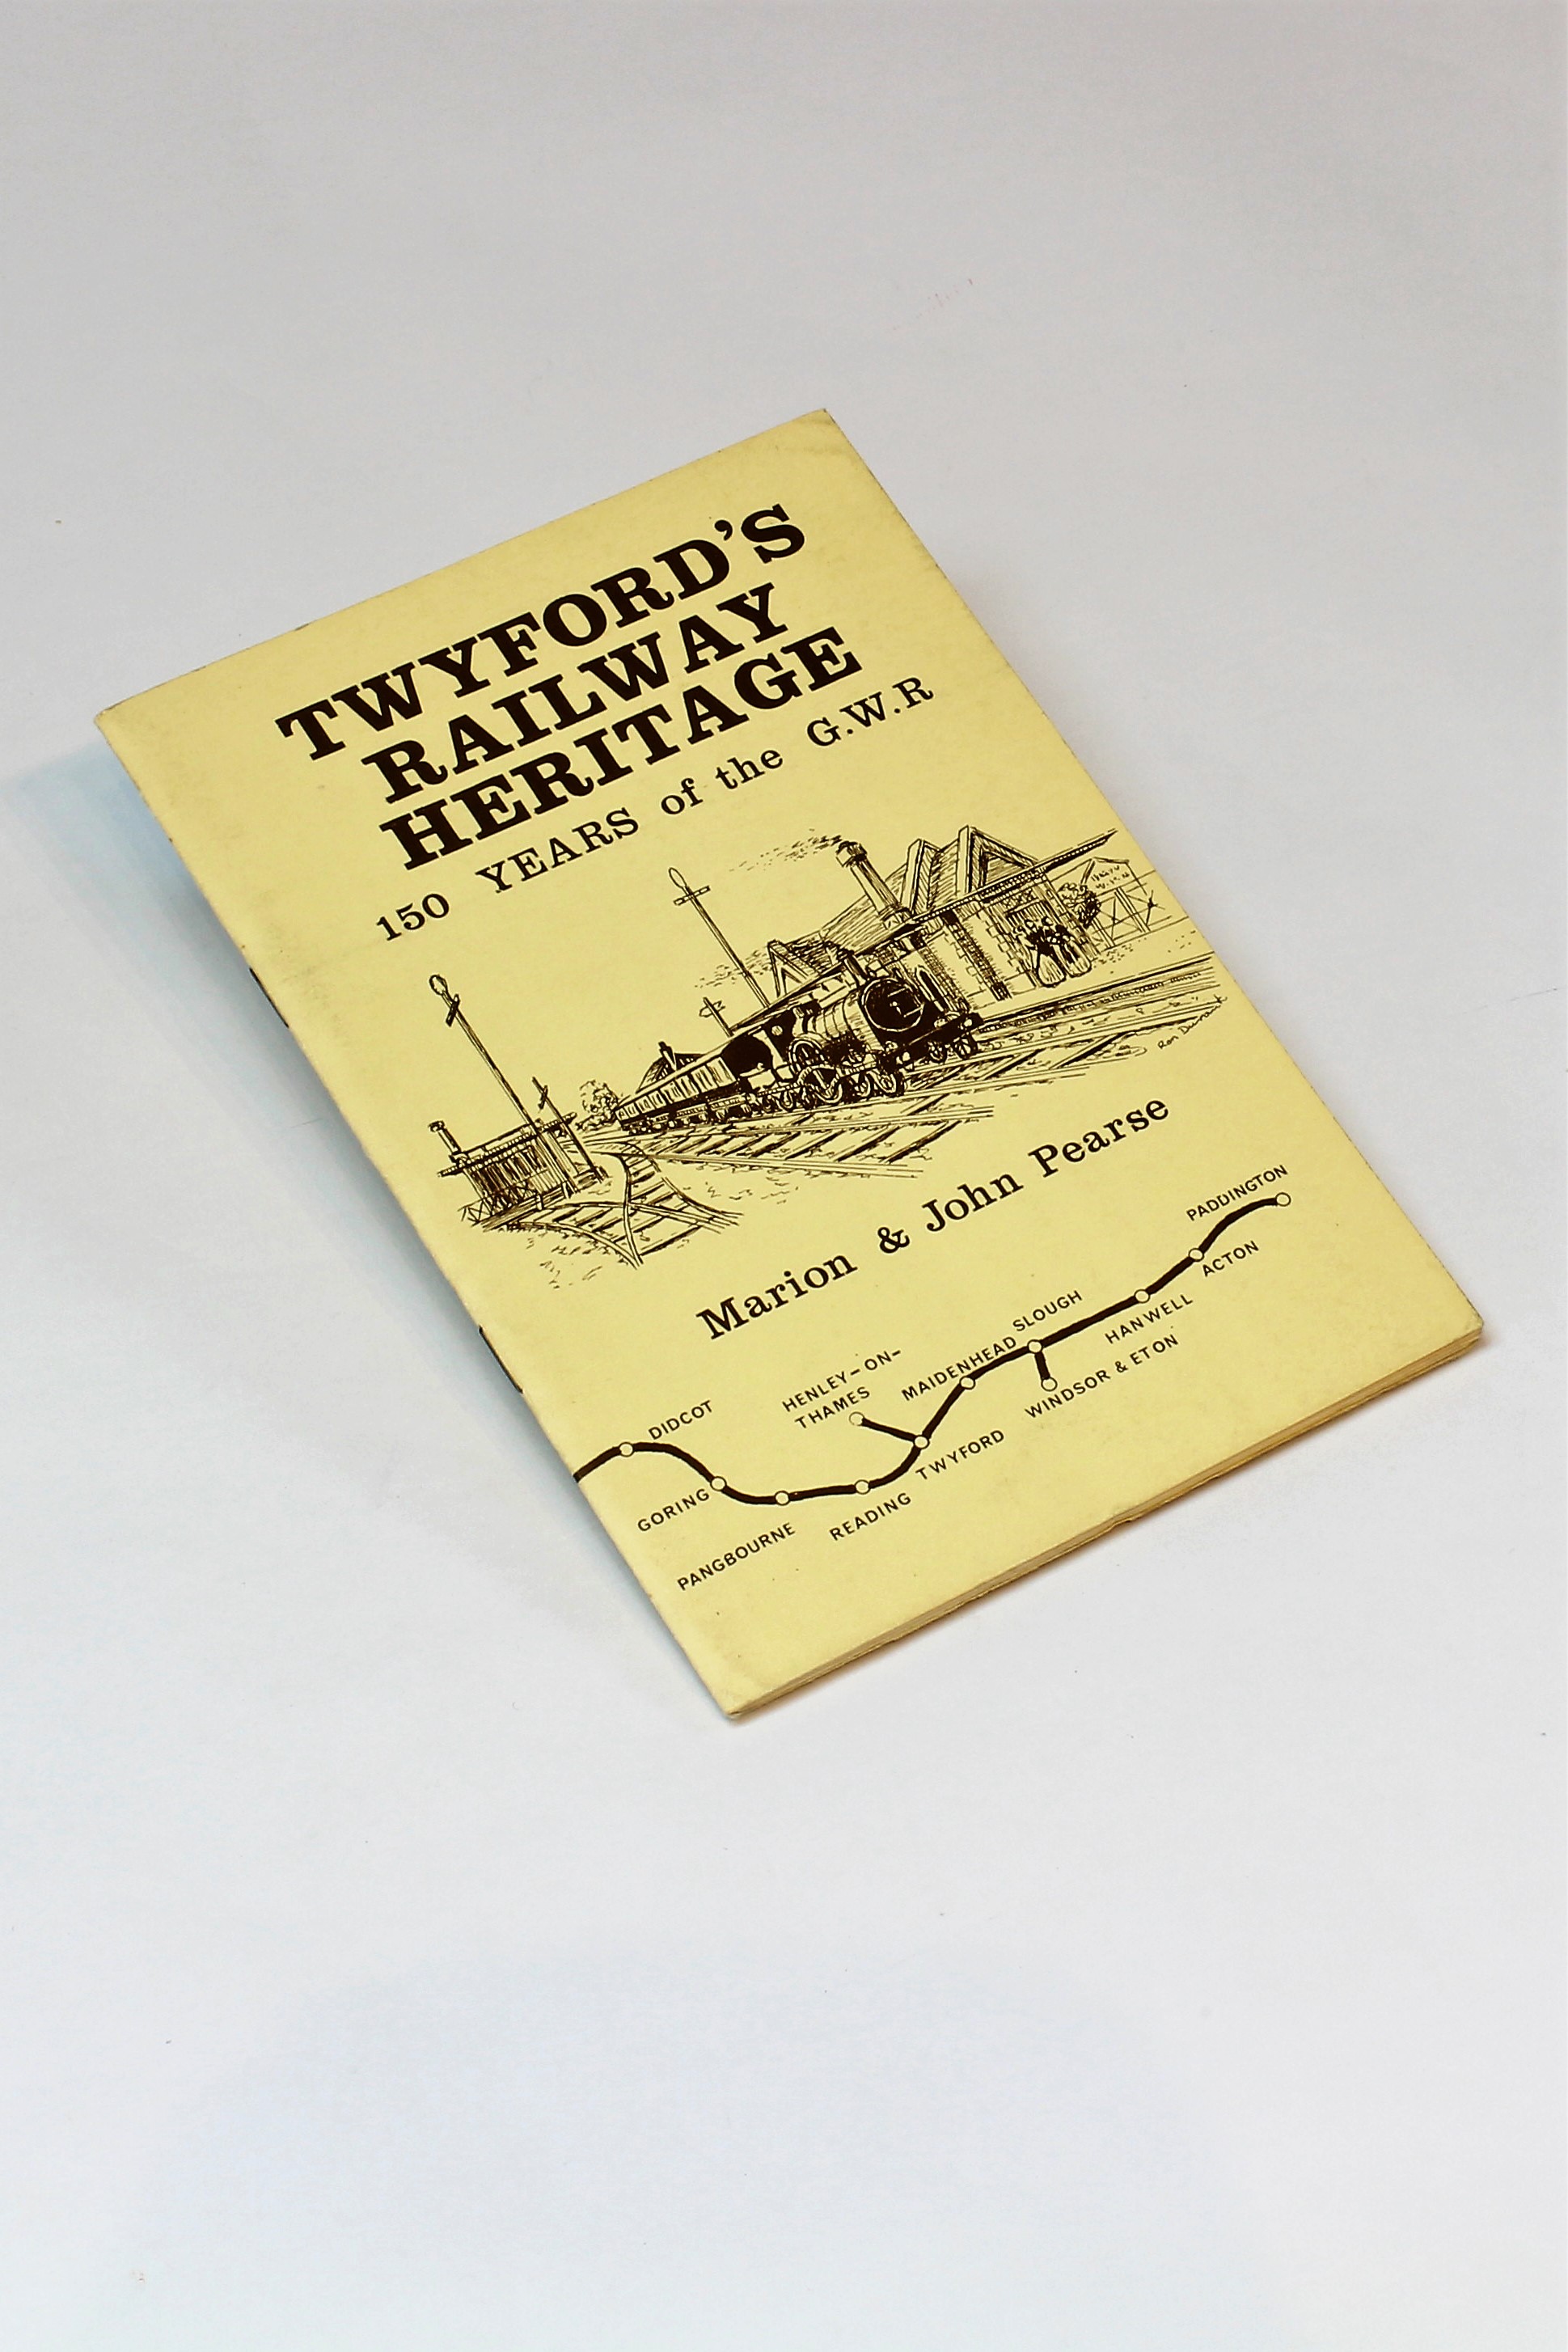 Twyford's Railway Heritage: 150 Years of the G.W.R. - Pearse, Marion & John